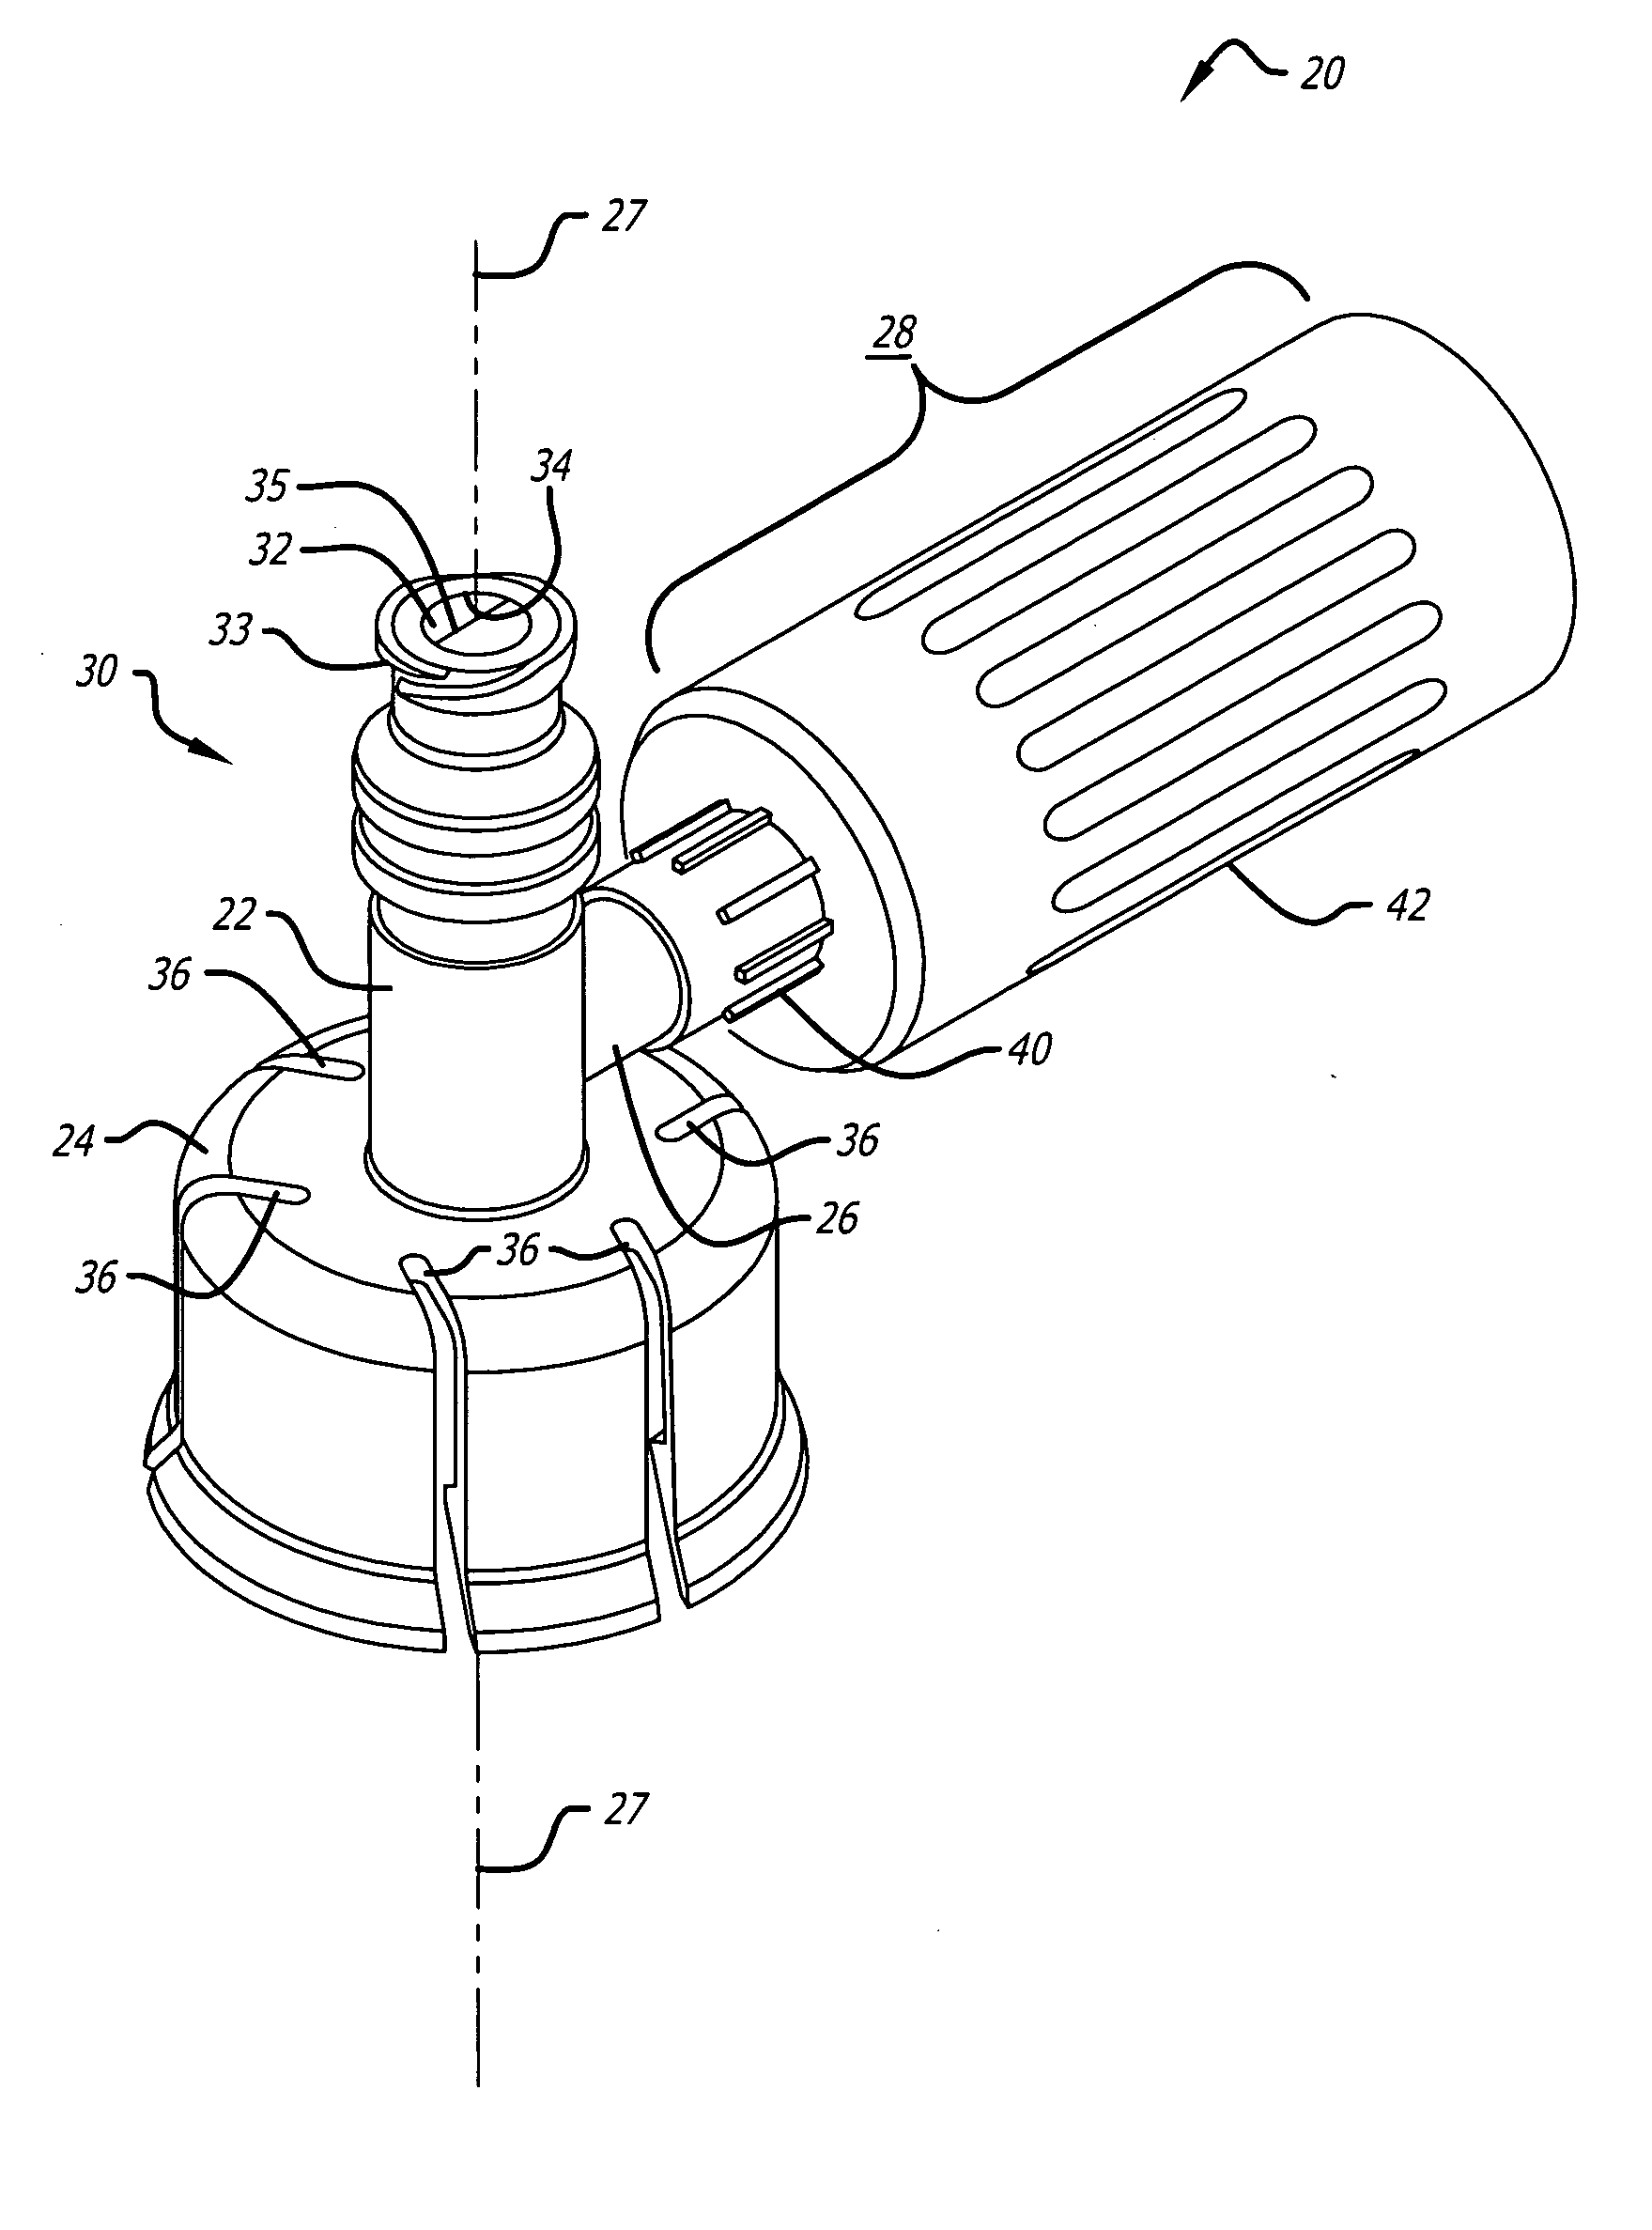 Vented vial adapter with filter for aerosol retention